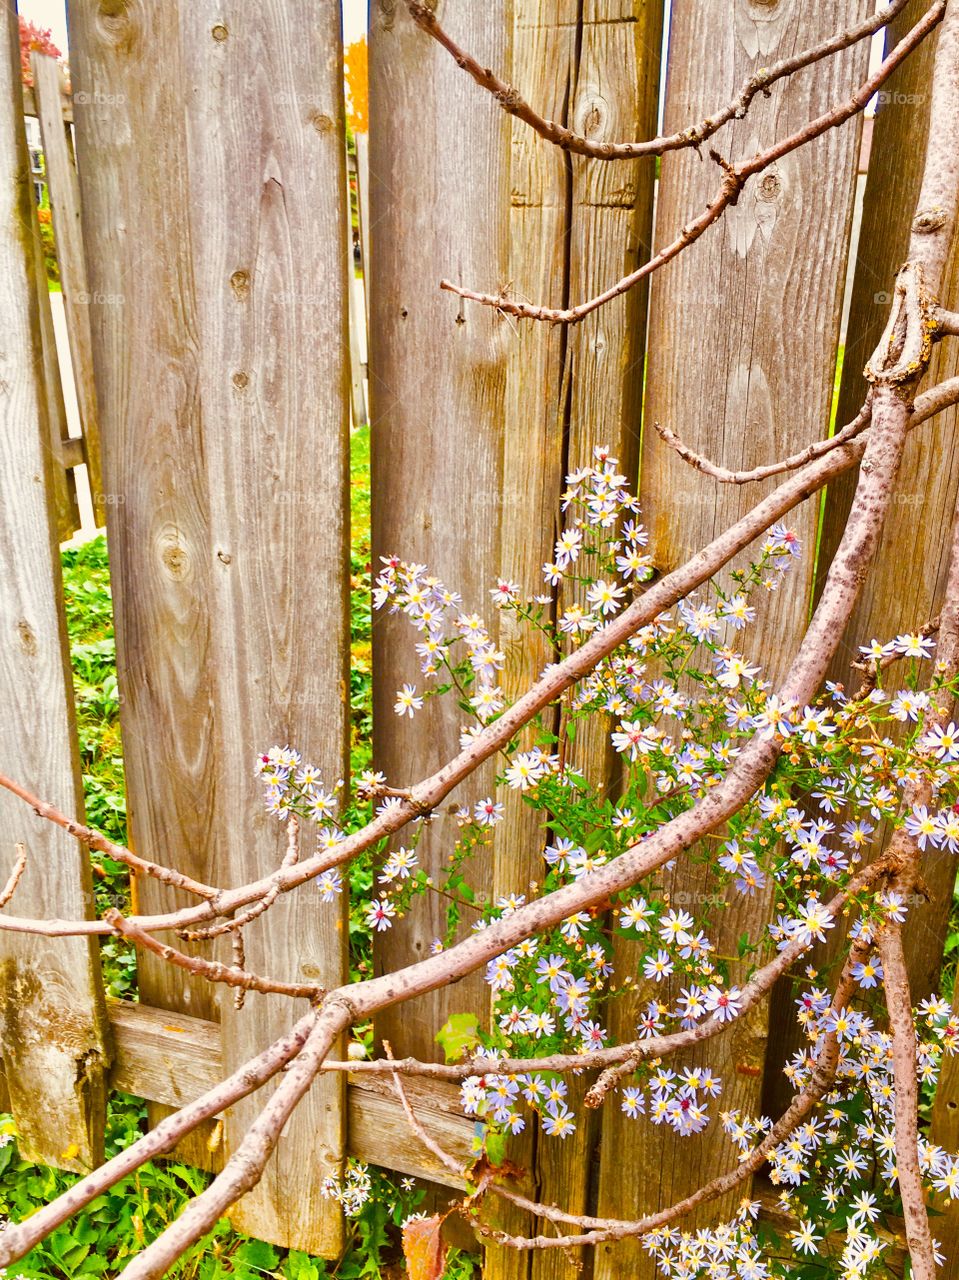 Flower Tree Leaning against Fence-Octobre 08 2018- Montreal, Quebec, Canada